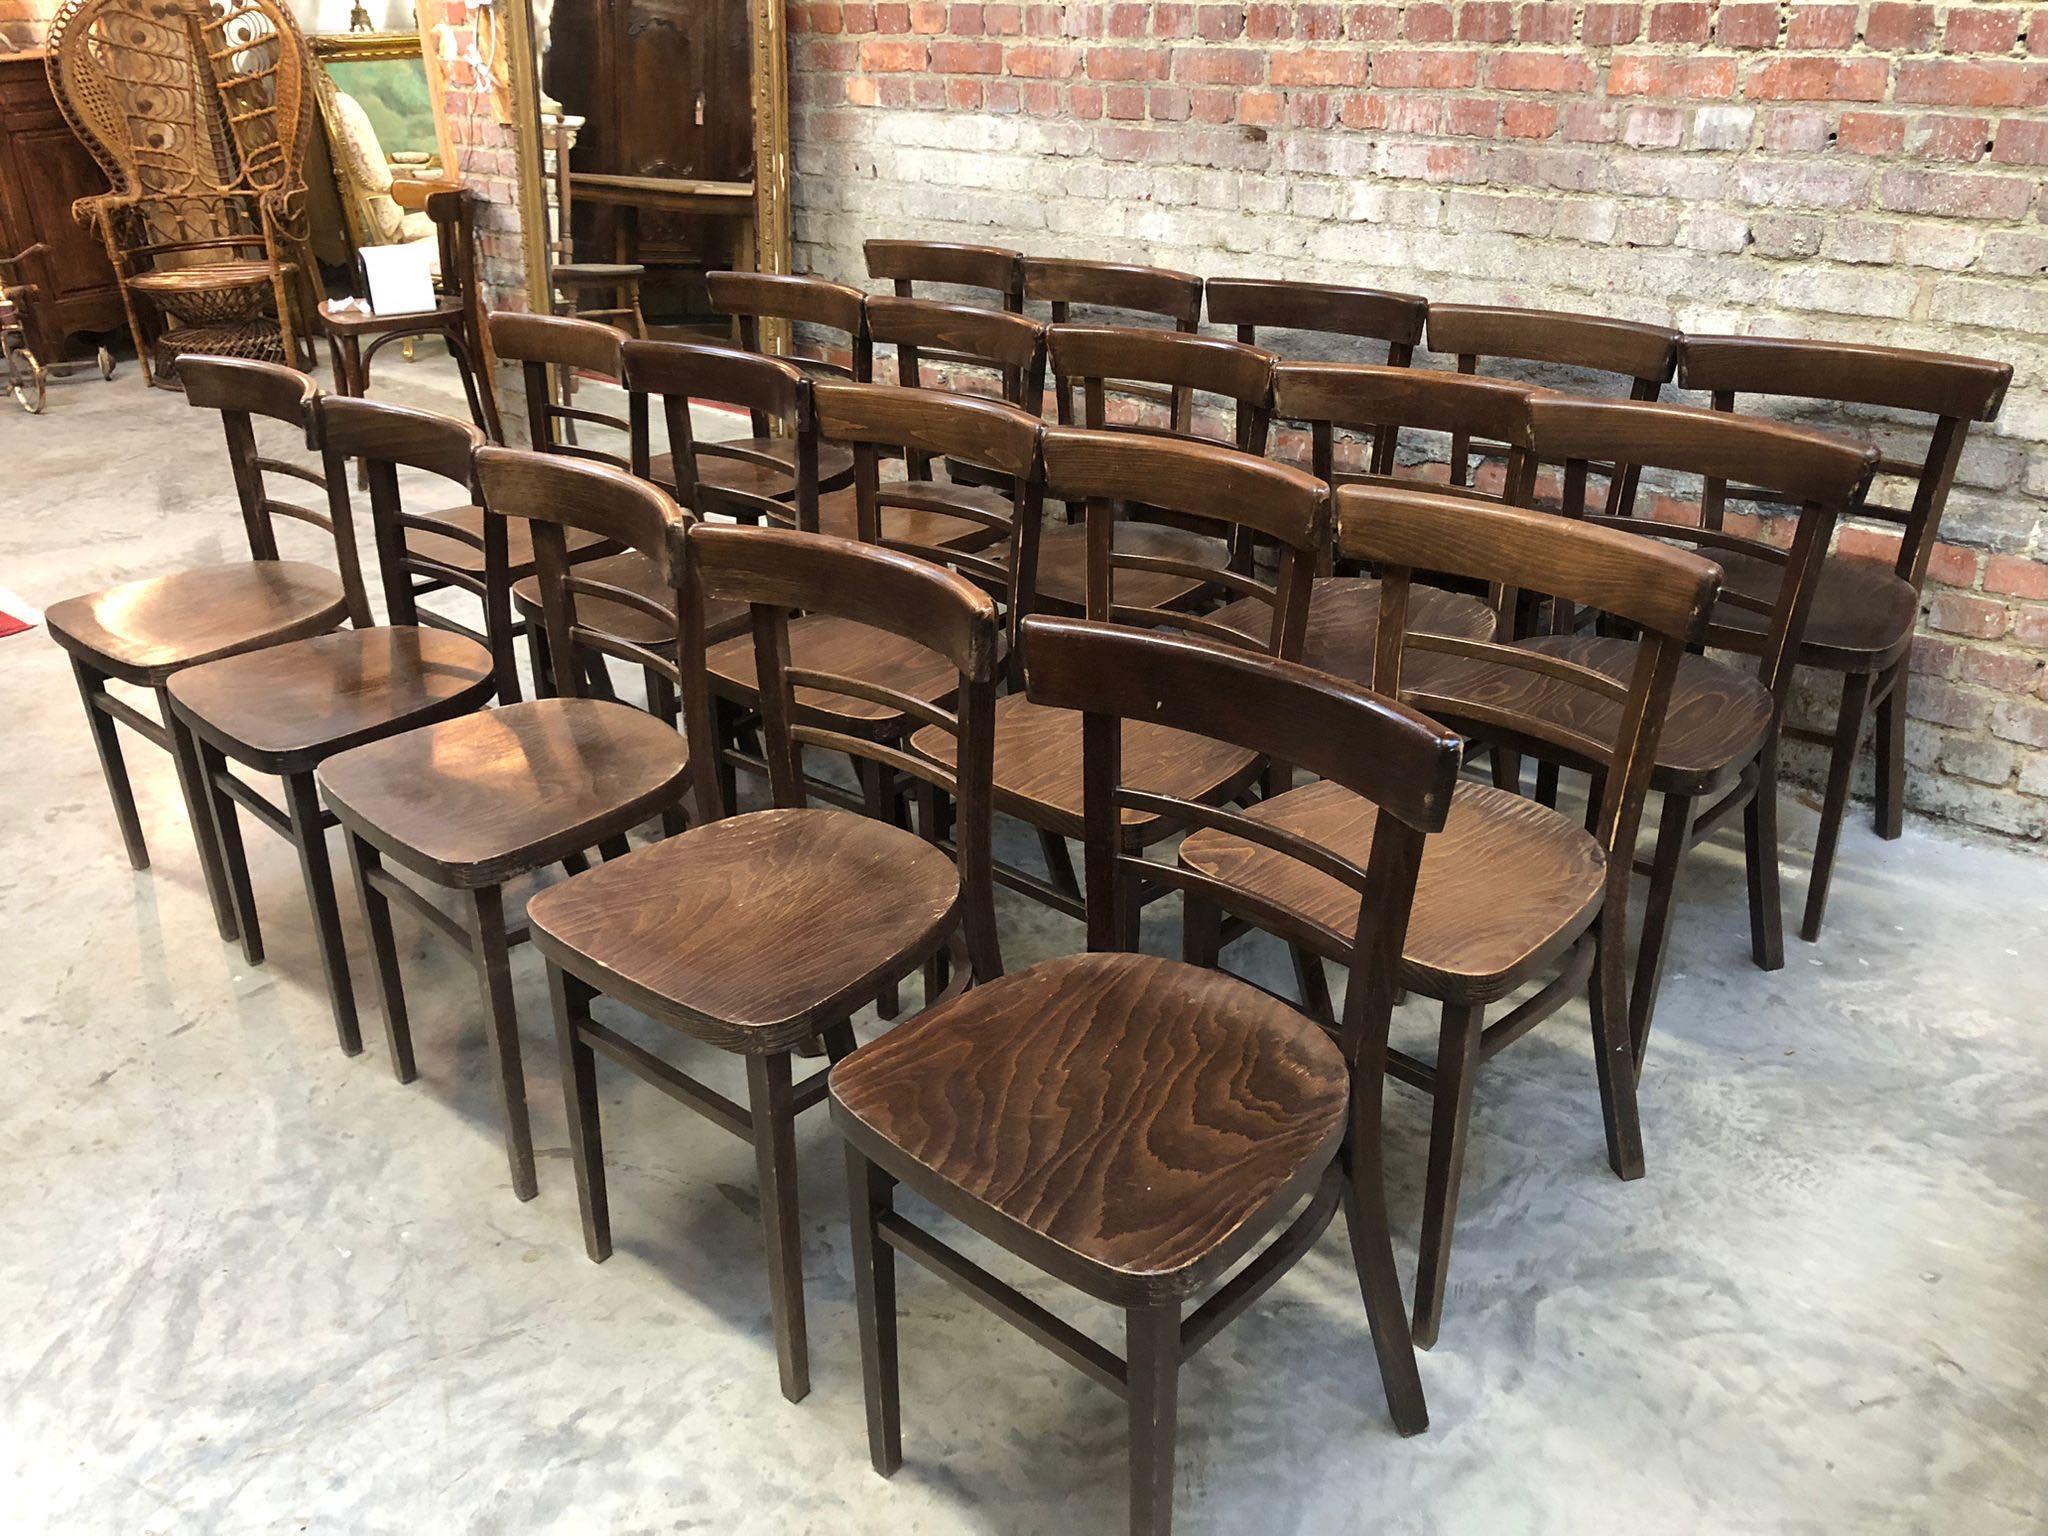 Classic bistro chairs from Paris are iconic symbols of the city's vibrant café culture and timeless charm. 